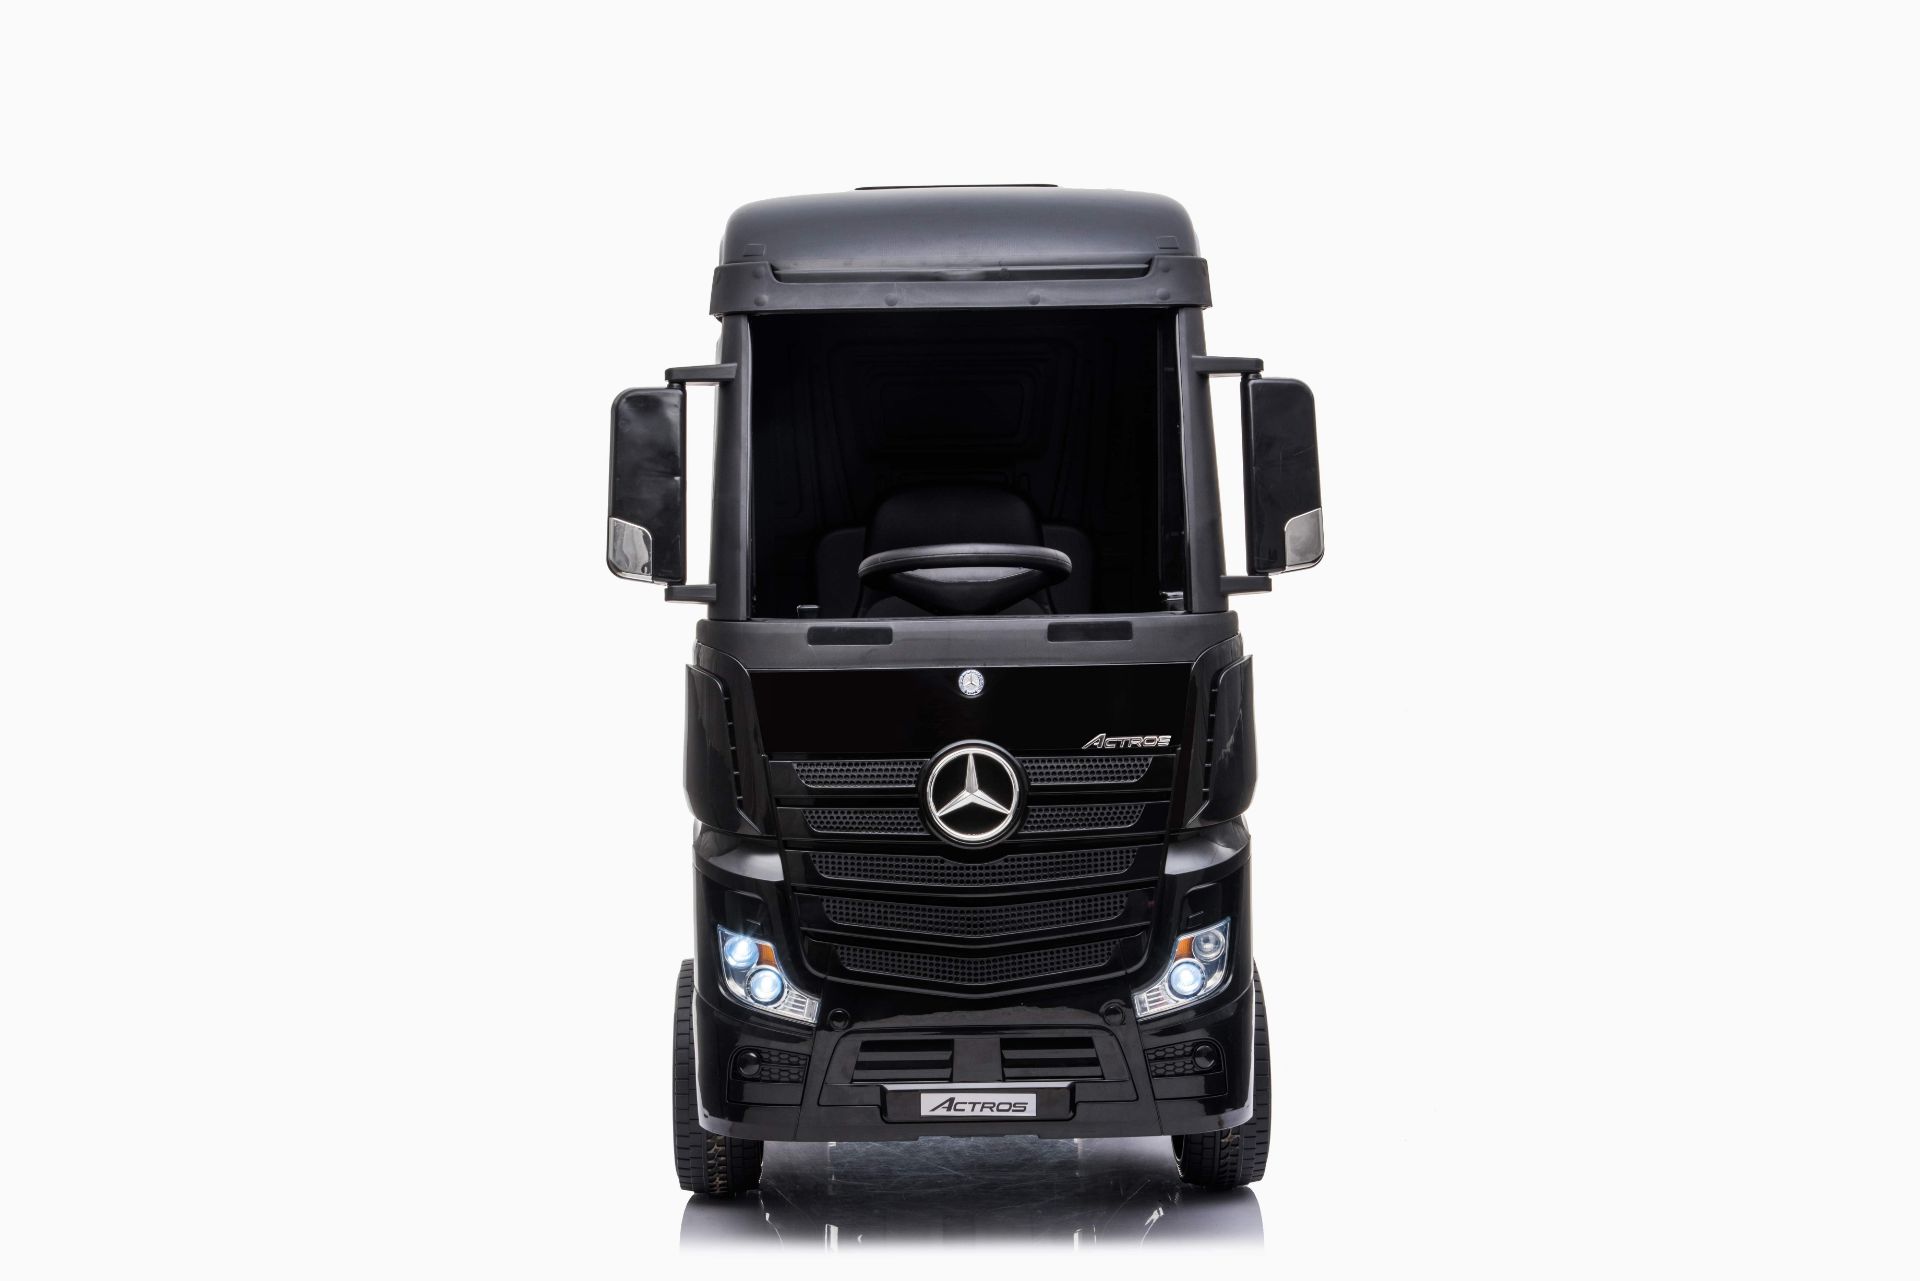 RIDE ON FULLY LICENCED MERCEDES BENZ ACTROS TRUCK HL358 12V WITH OFFICIAL TRAILER - BLACK - Image 6 of 14